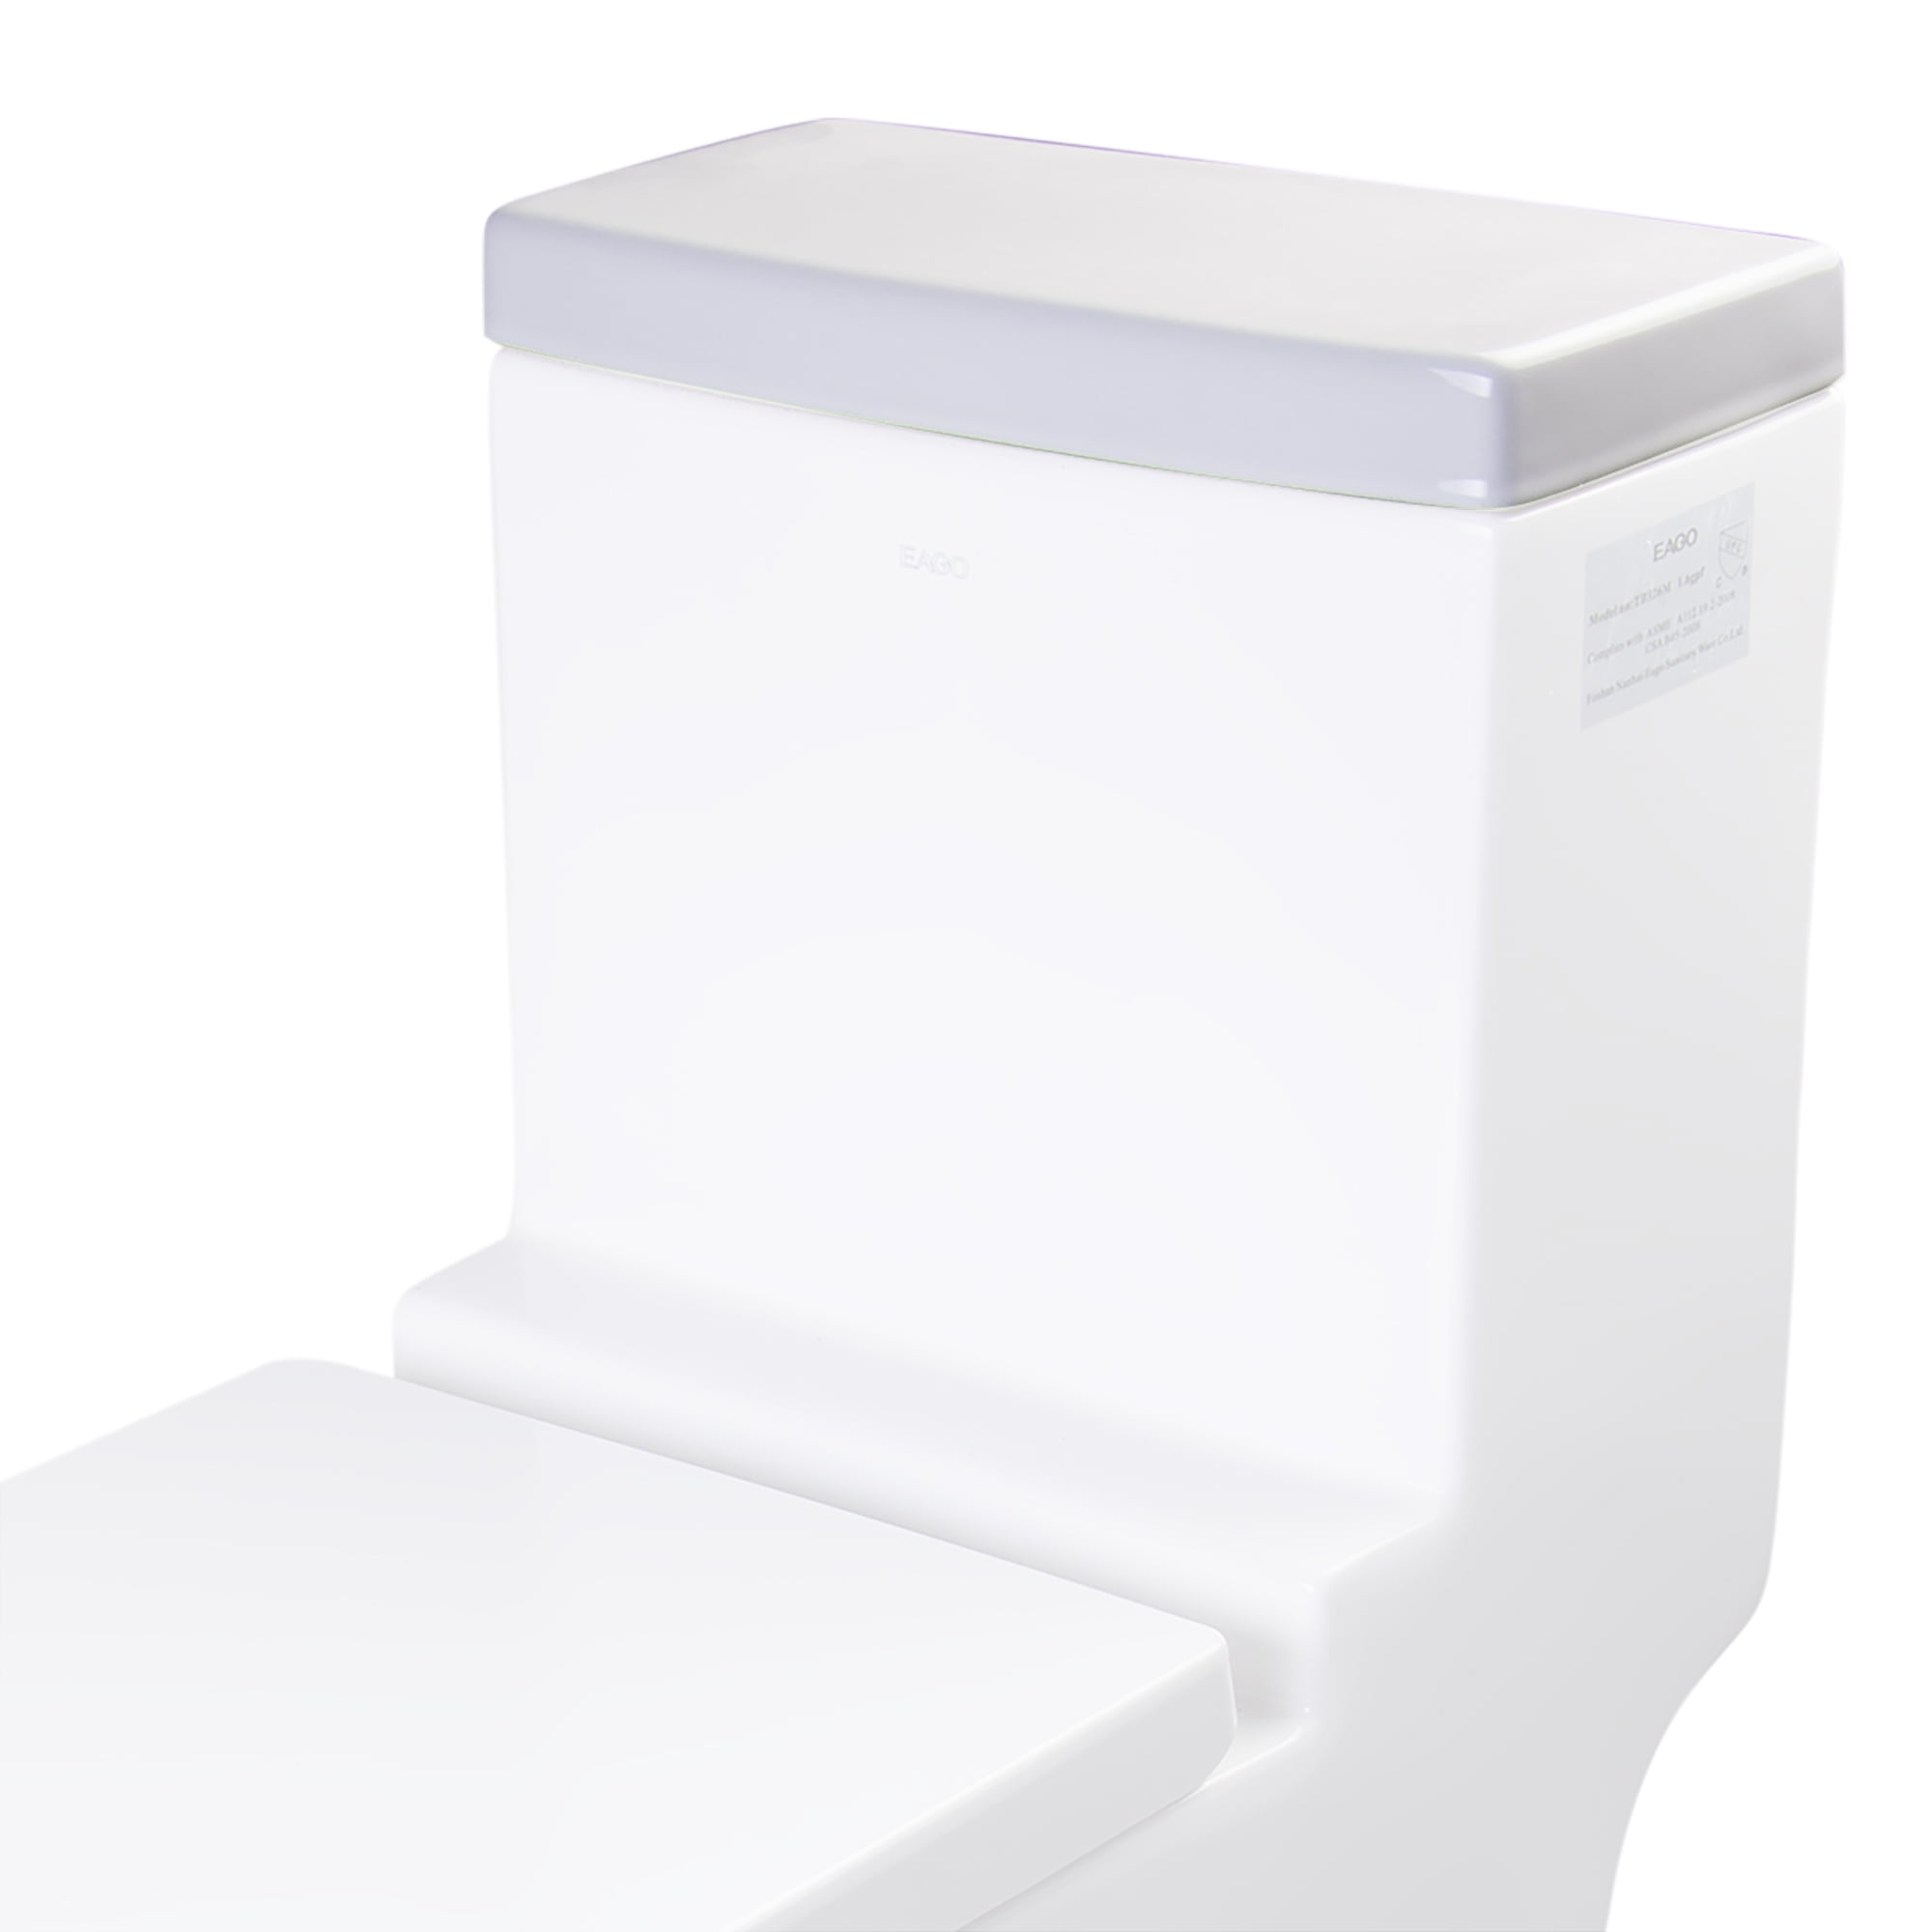 Replacement Ceramic Toilet Lid, White For Tb326